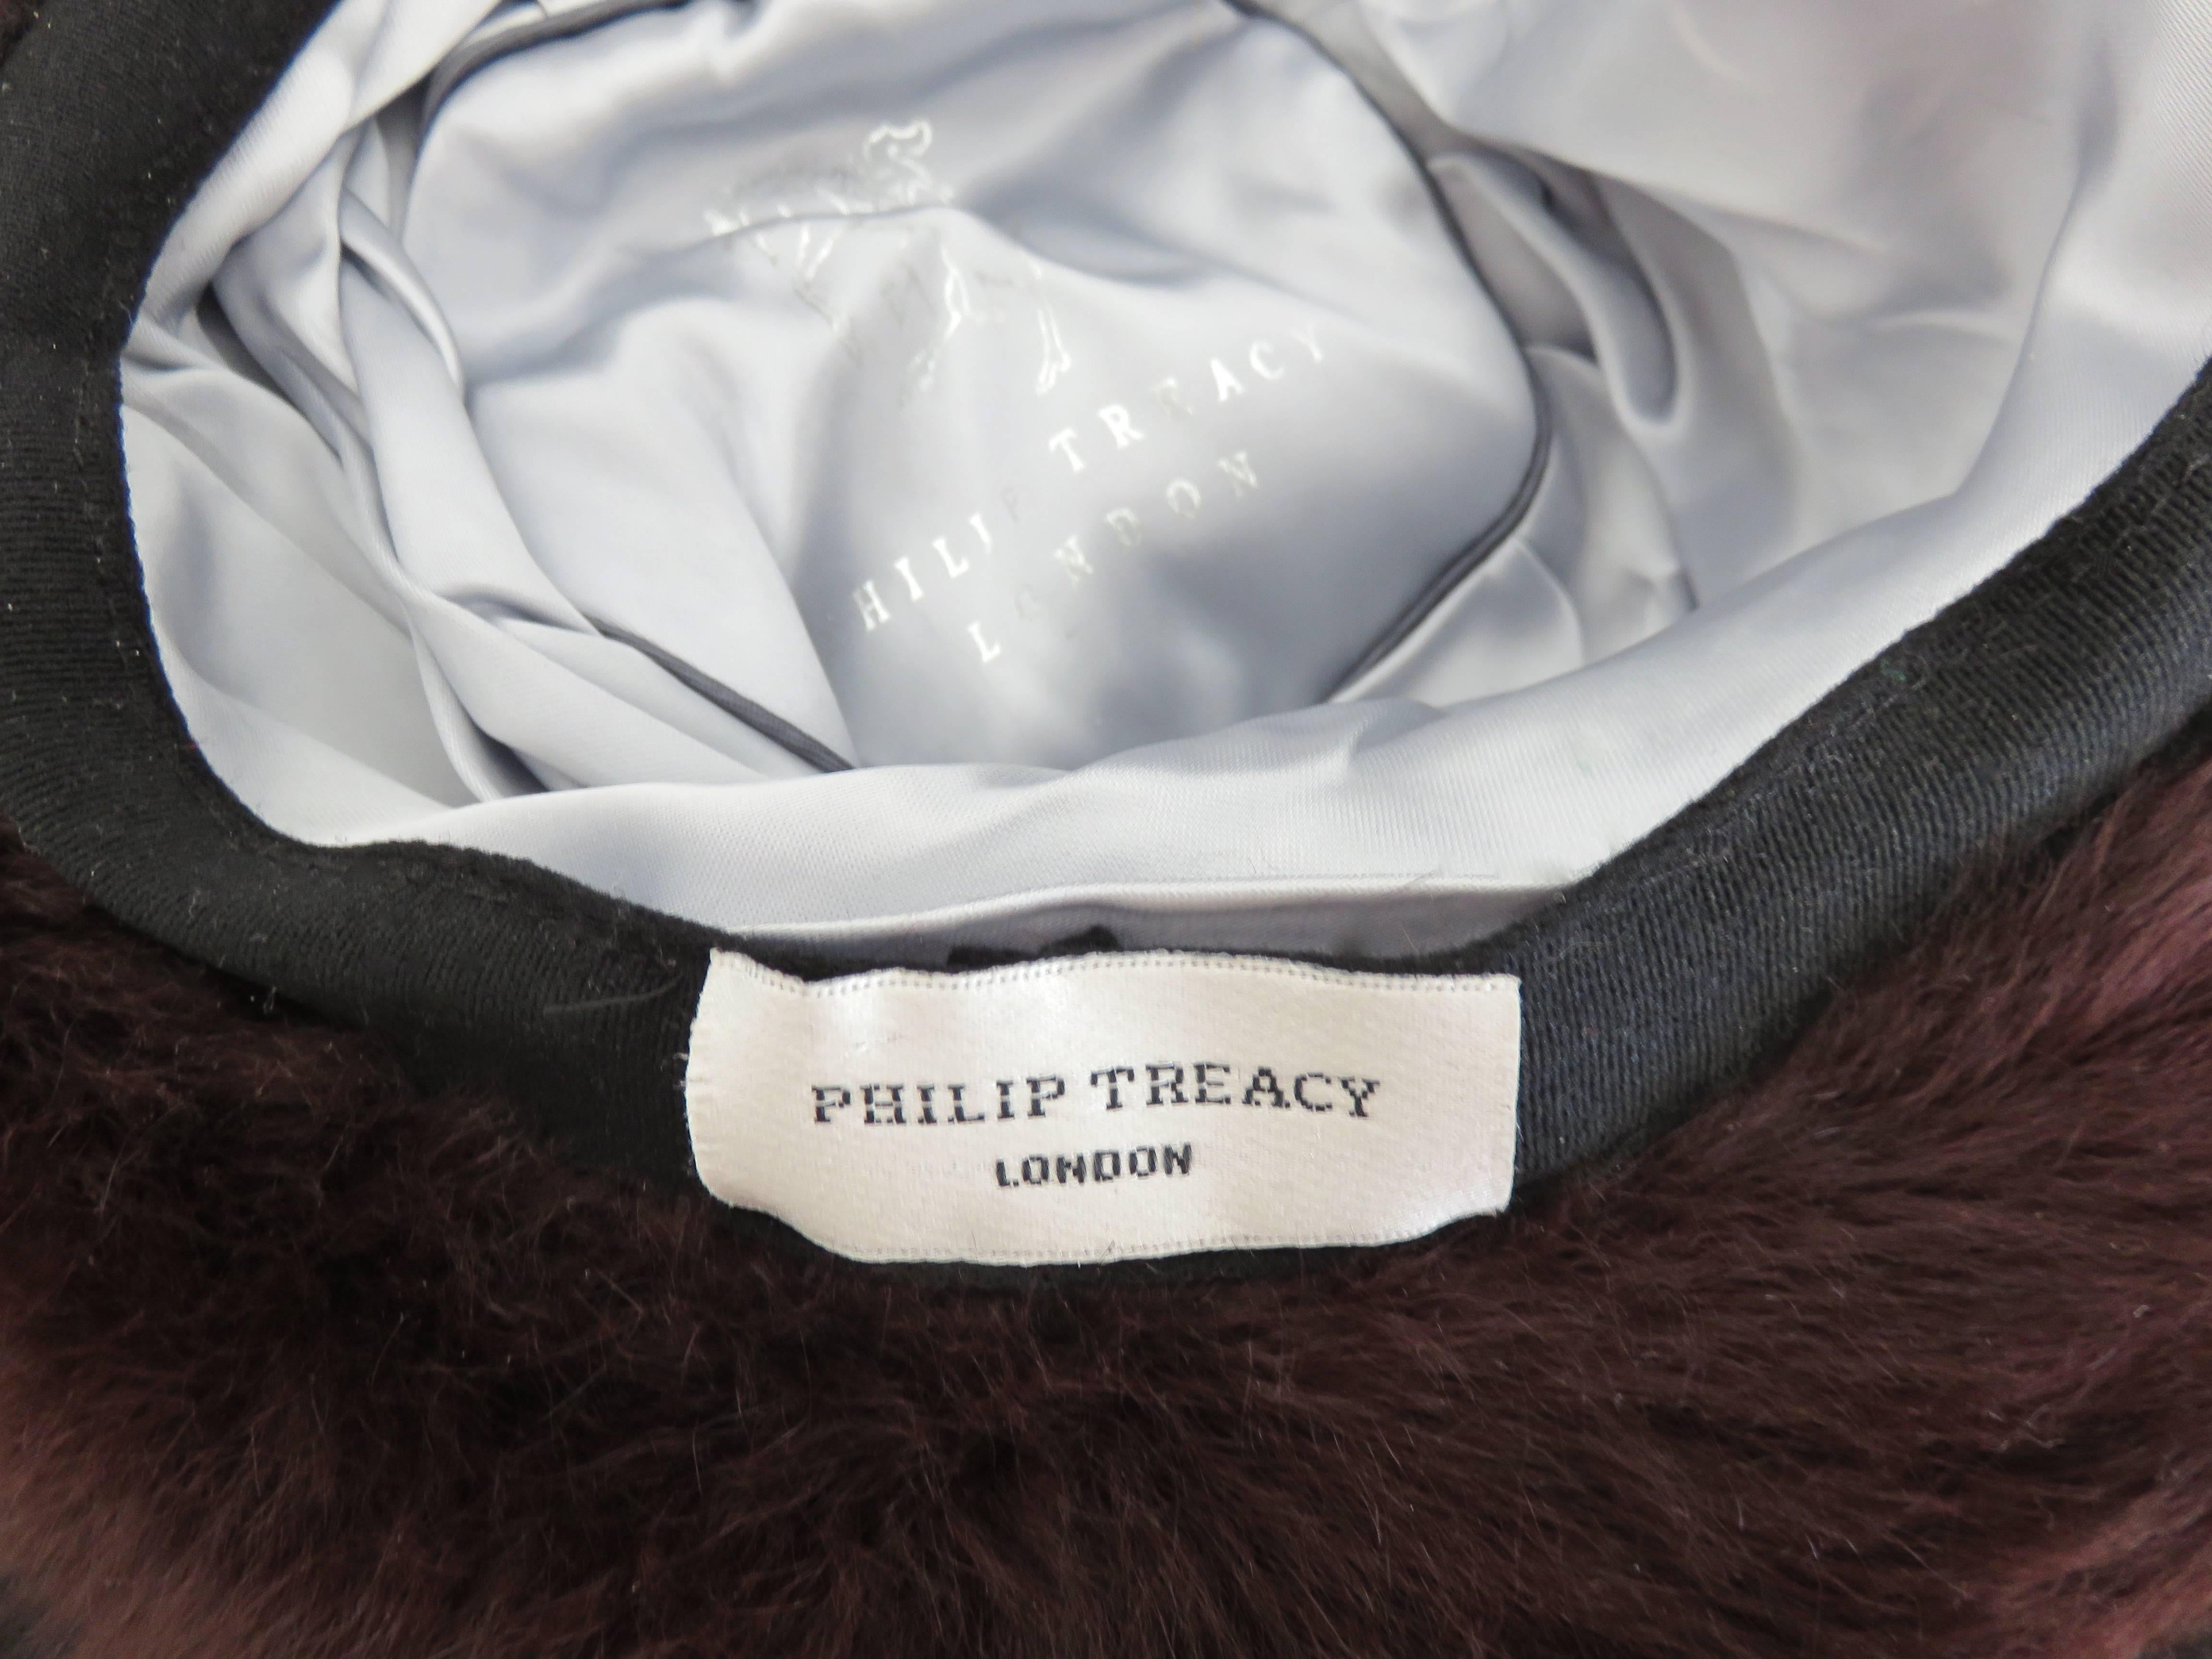 PHILIP TREACY Mohair bowler hat  - worn once 3